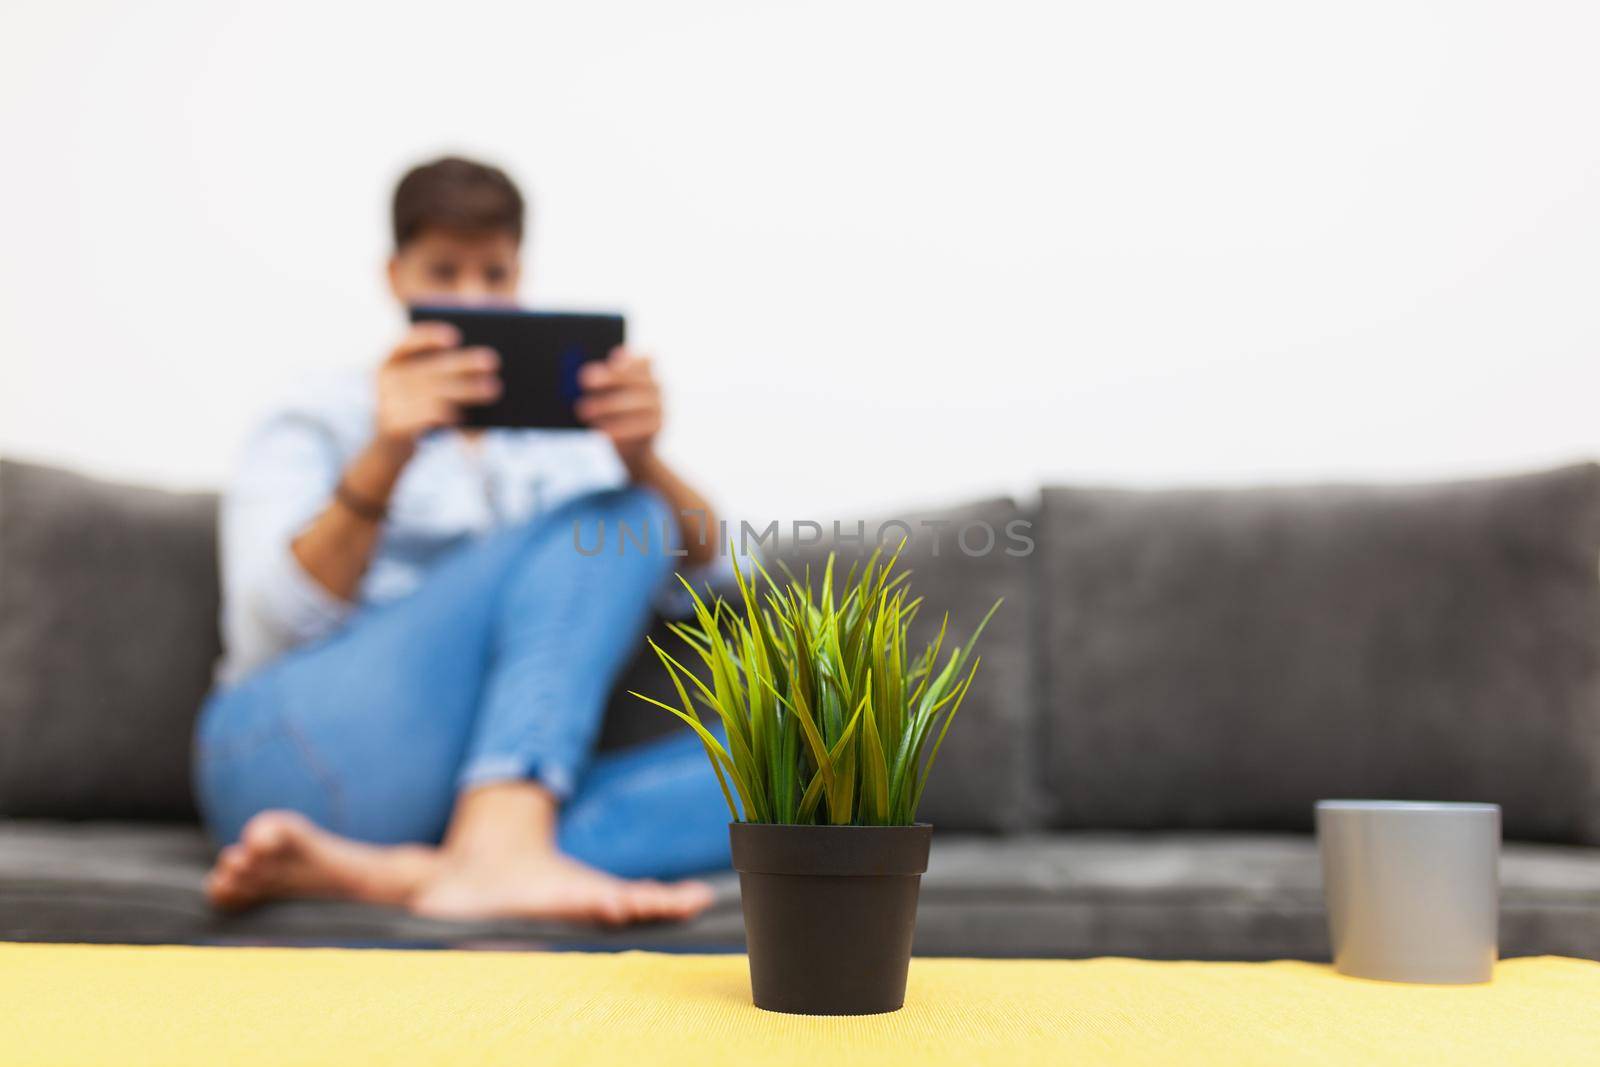 green plant on a table in living room. out of focus man with tablet